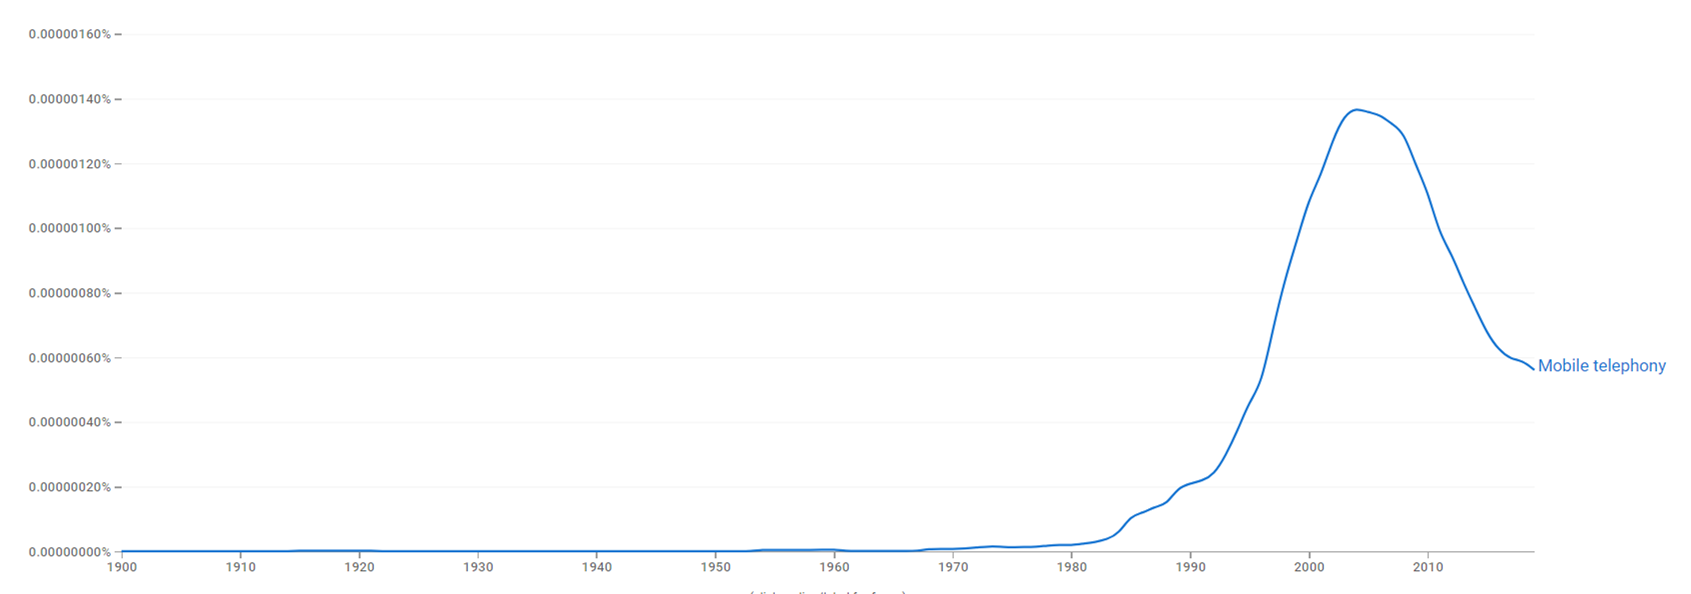 Mobile telephony ngram.png